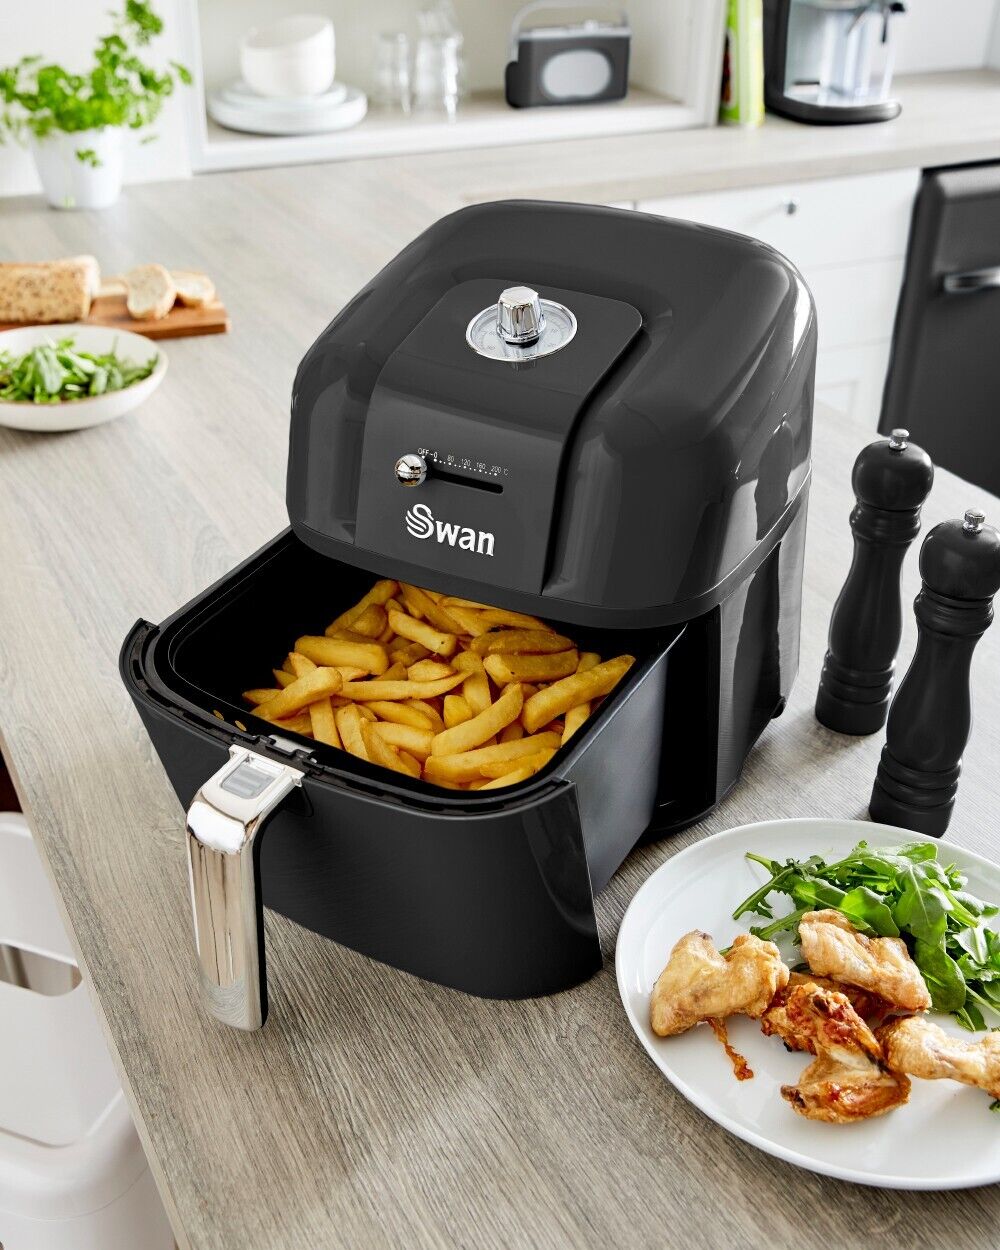 Swan Retro Black Air Fryer 6L Healthy Energy Efficient Cooking for the Family